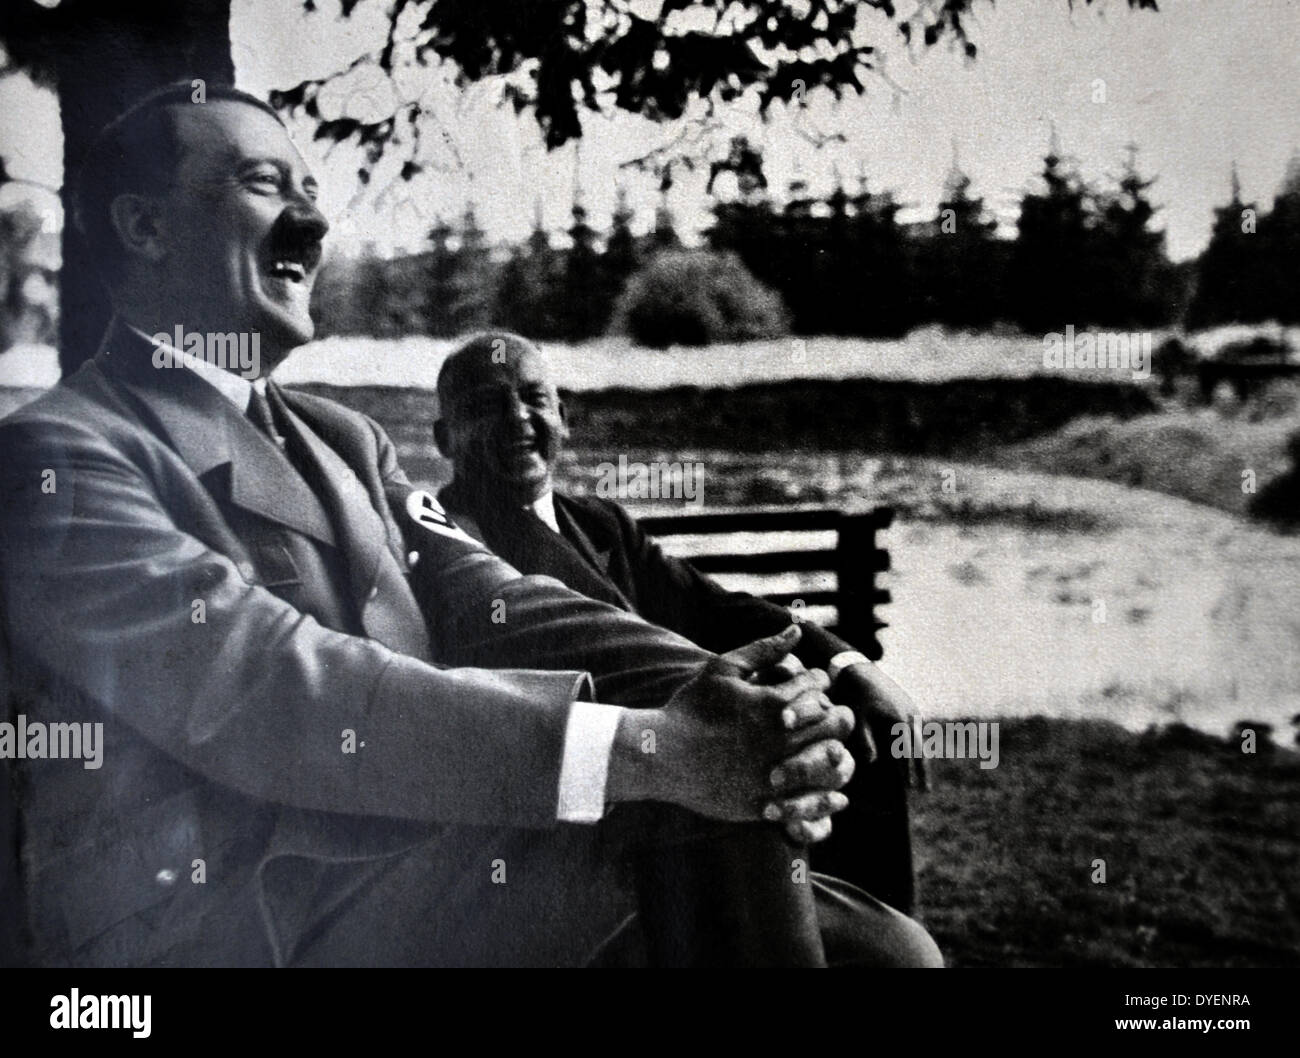 Adolf Hitler 1889-1945. relaxing at a country retreat. German politician and the leader of the Nazi Party driving a car. He was chancellor of Germany from 1933 to 1945 and dictator of Nazi Germany from 1934 to 1945. Stock Photo